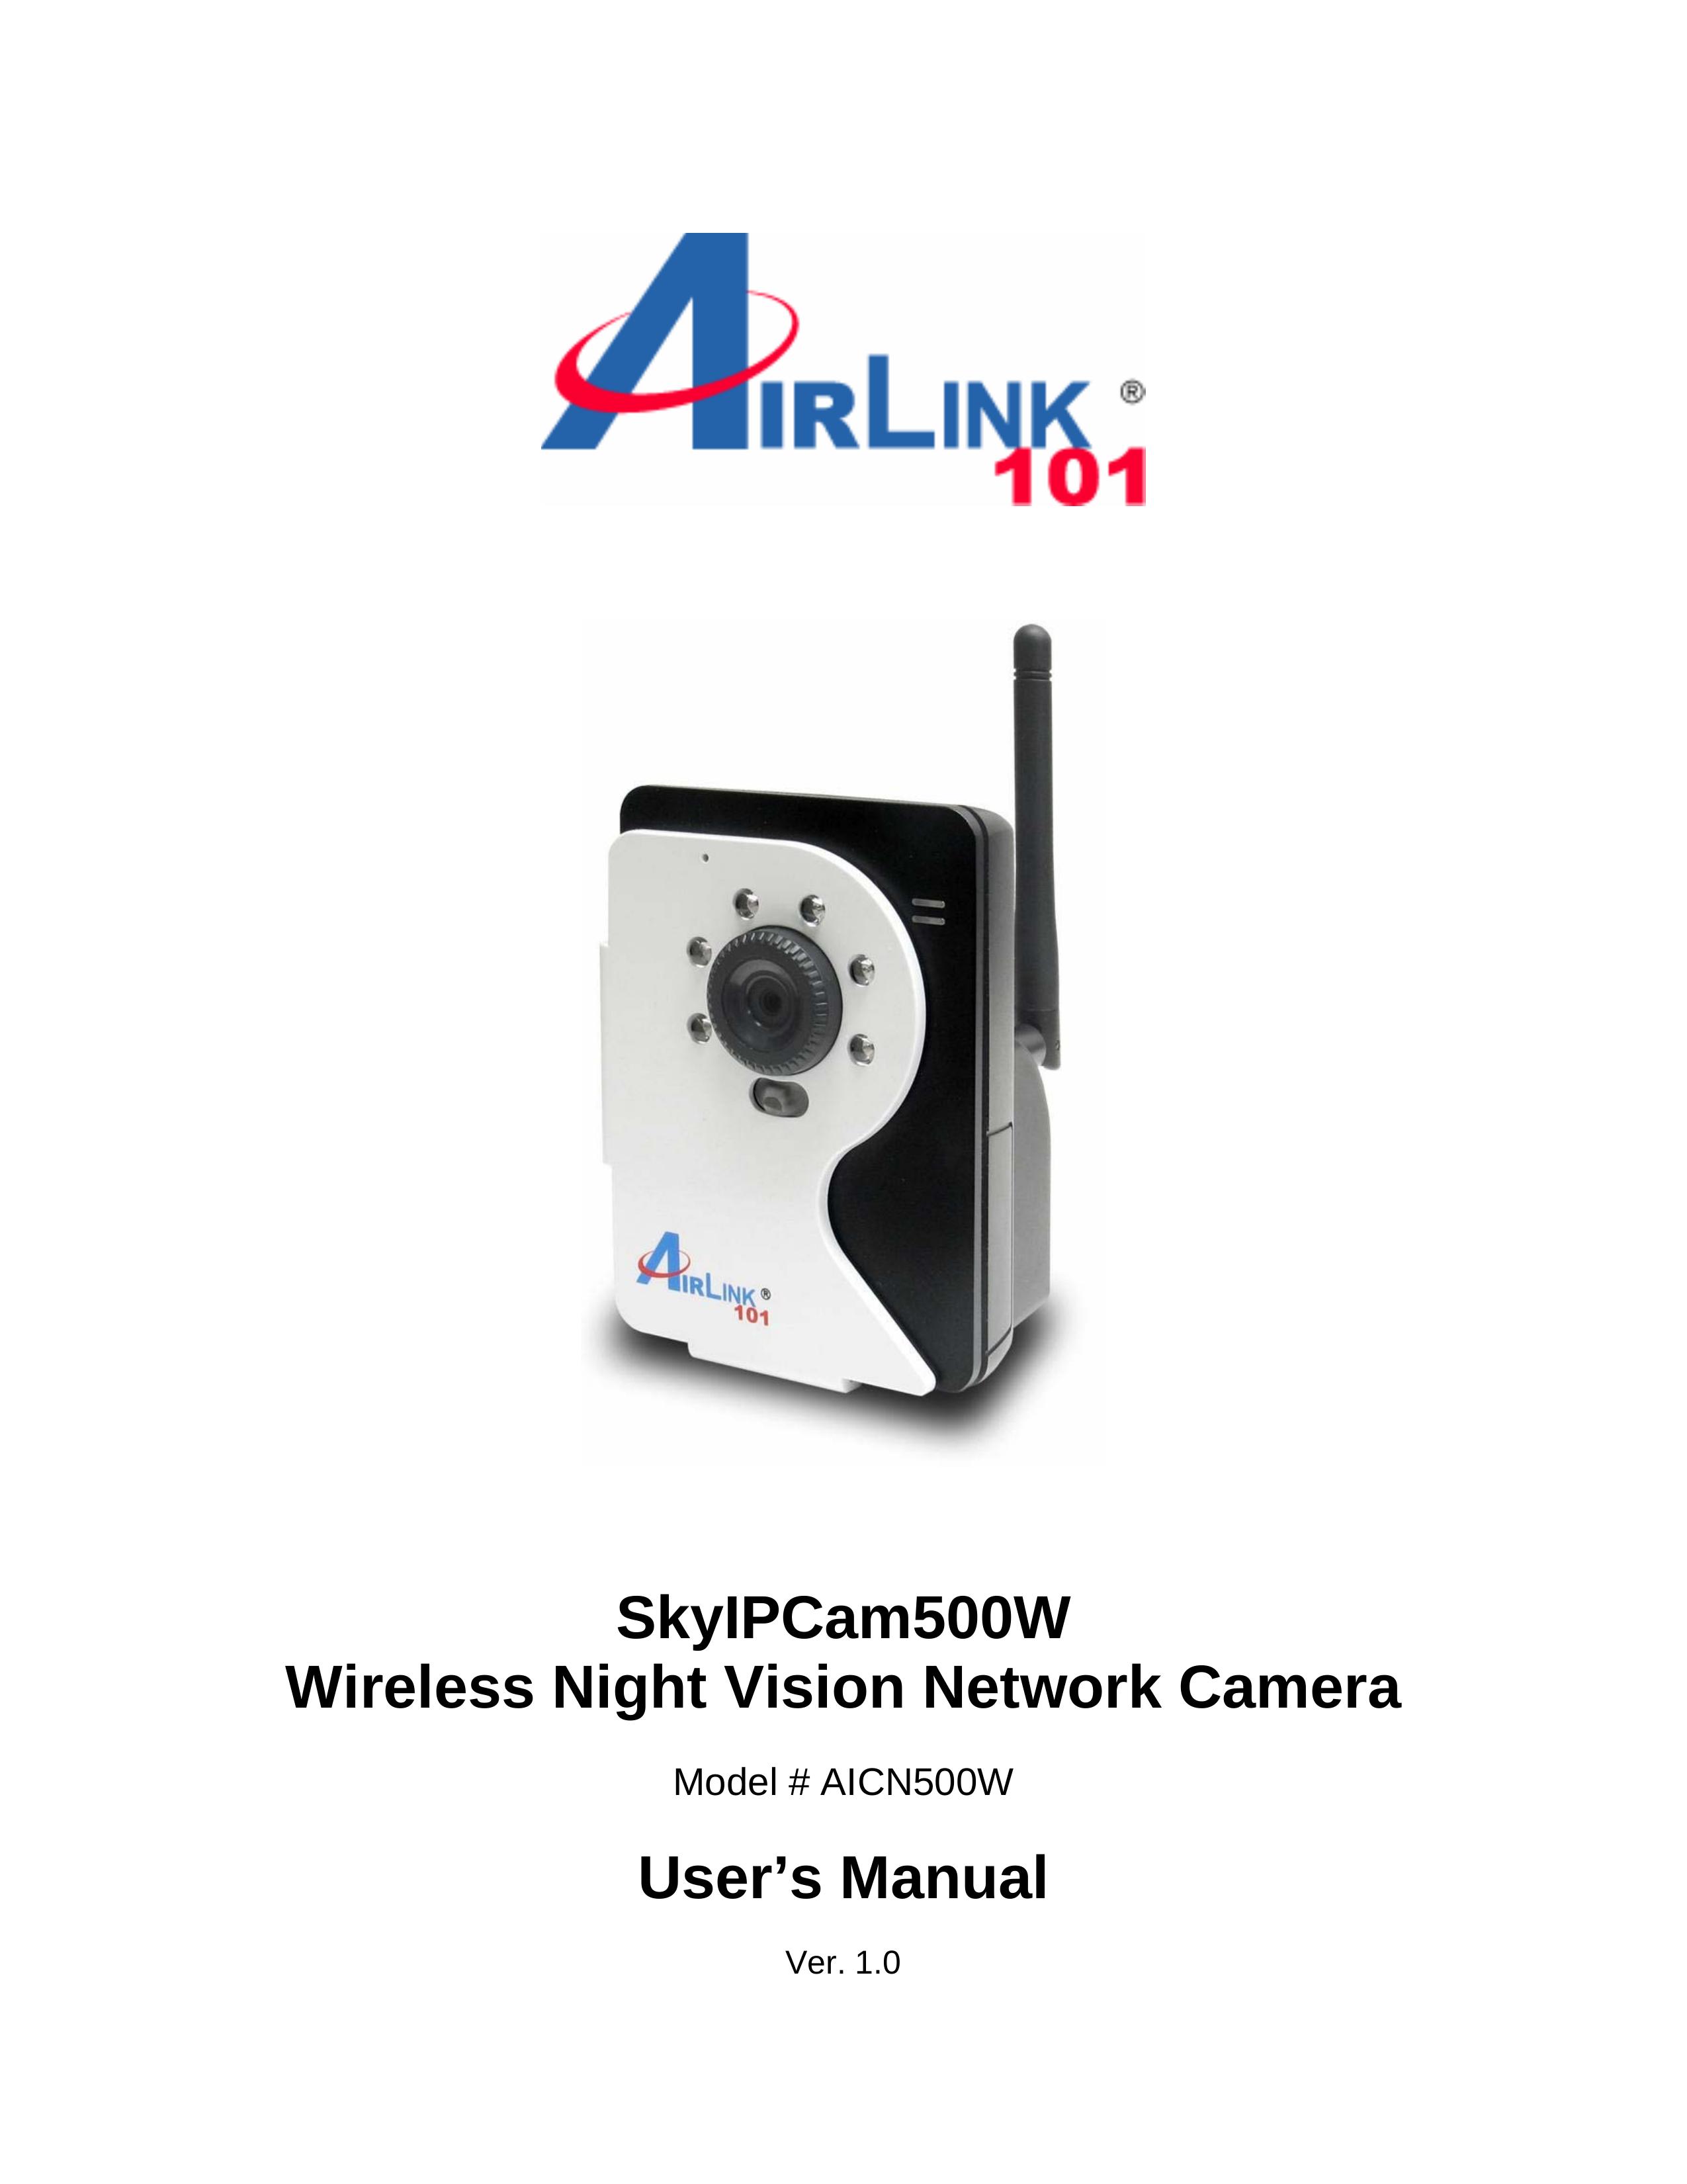 Airlink101 AICN500W Security Camera User Manual